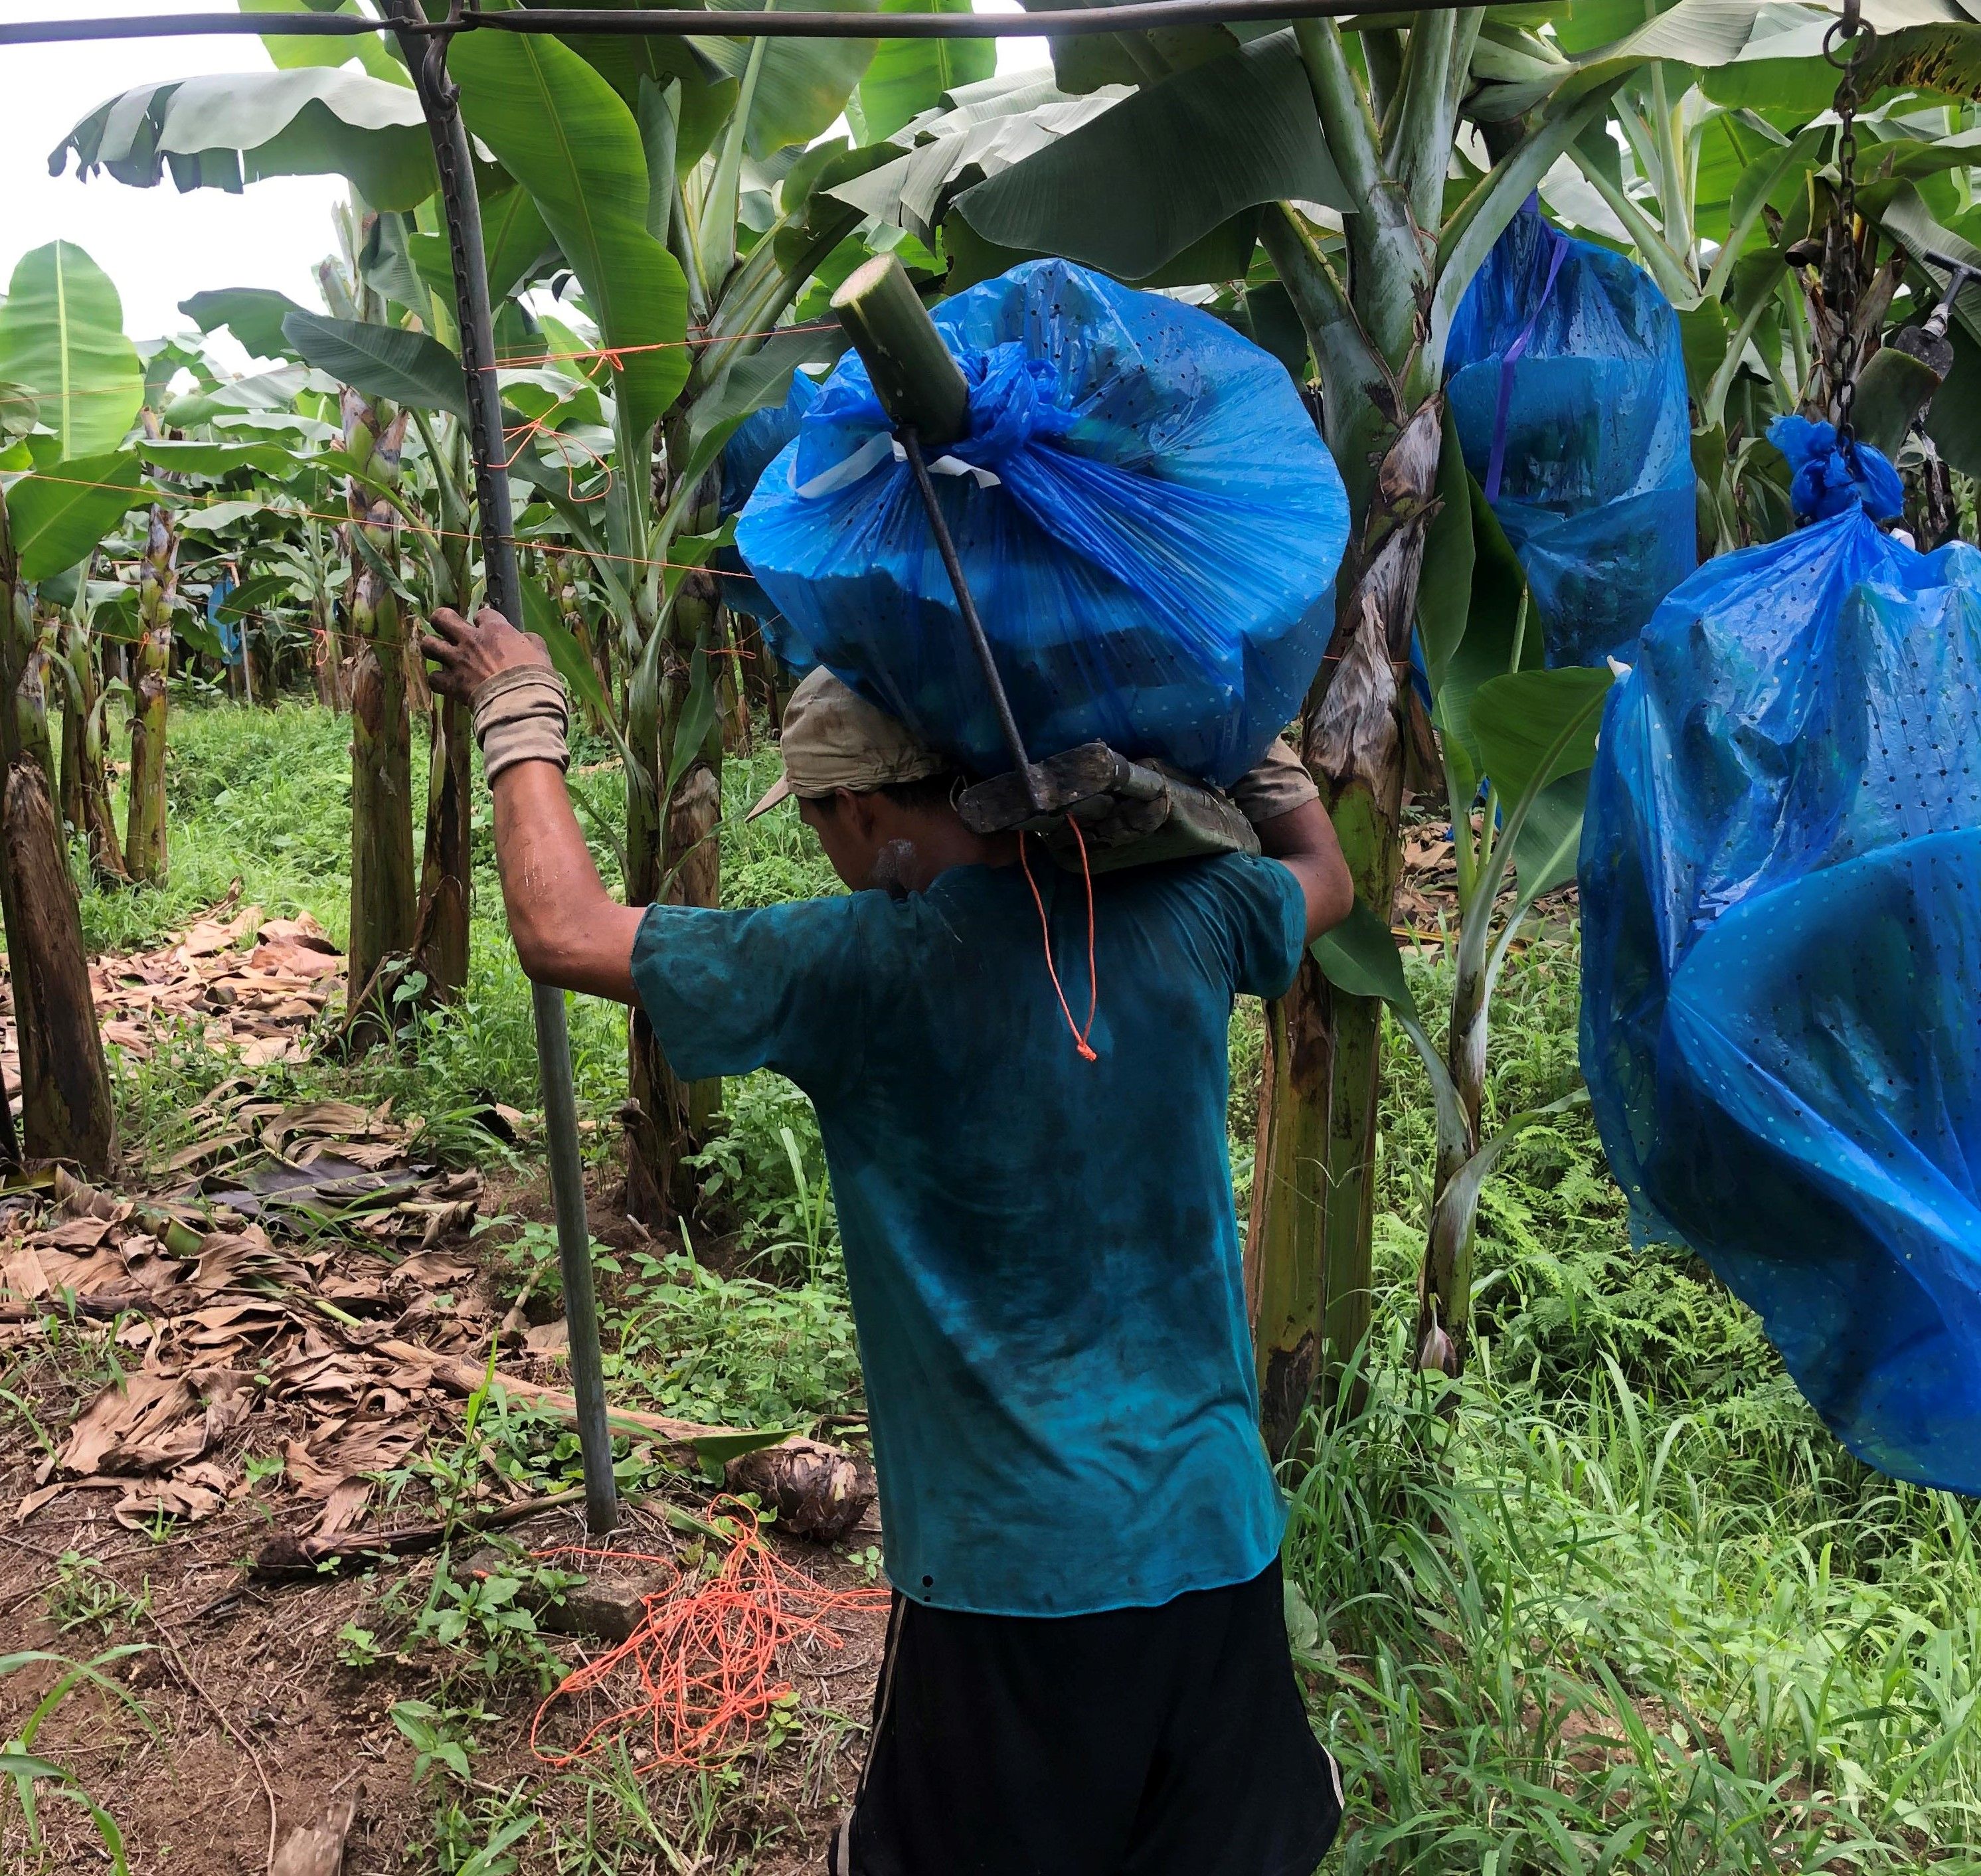 A young boy, 16, harvests the bananas, which can weigh up to 60 pounds. Image by Madison Stewart. Costa Rica, 2019. 